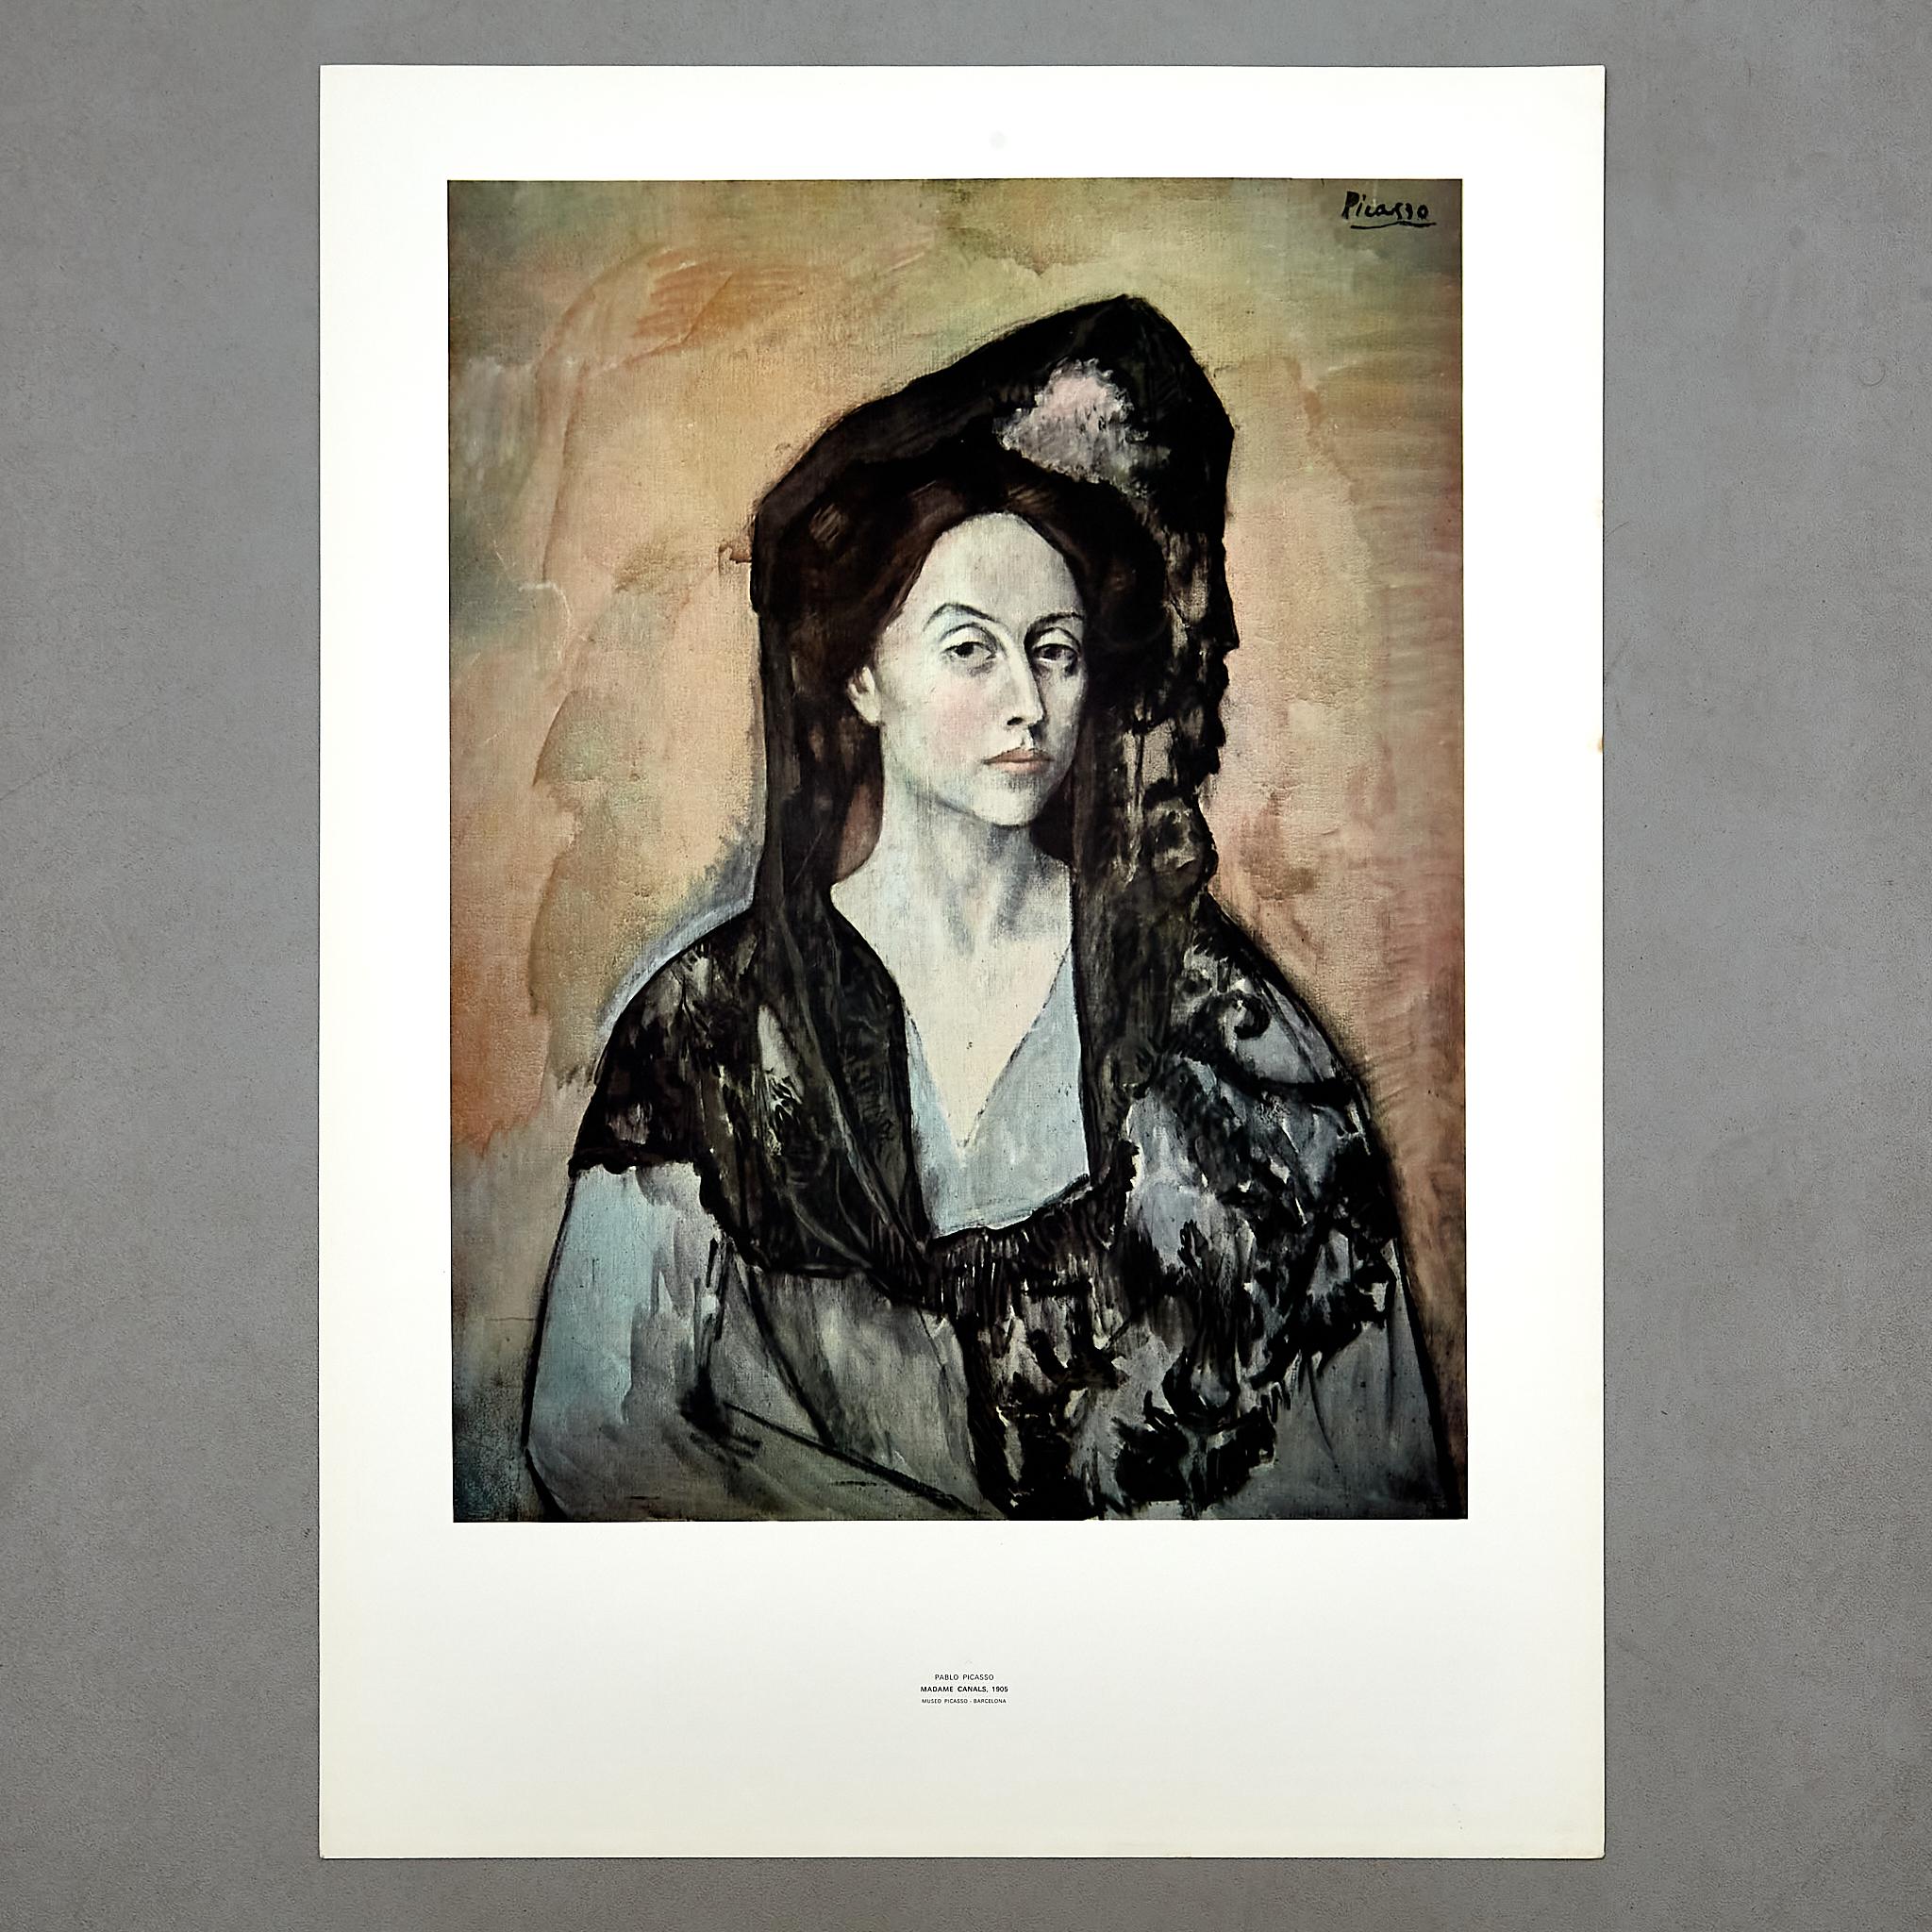 High Quality Print of Madame Canals 1905 by Pablo Picasso.

Manufactured in Spain, circa 1966.

In original condition with minor wear consistent of age and use, preserving a beautiful patina.

Materials: 
Paper 

Dimensions: 
D 0.1 cm x W 55.5 cm x